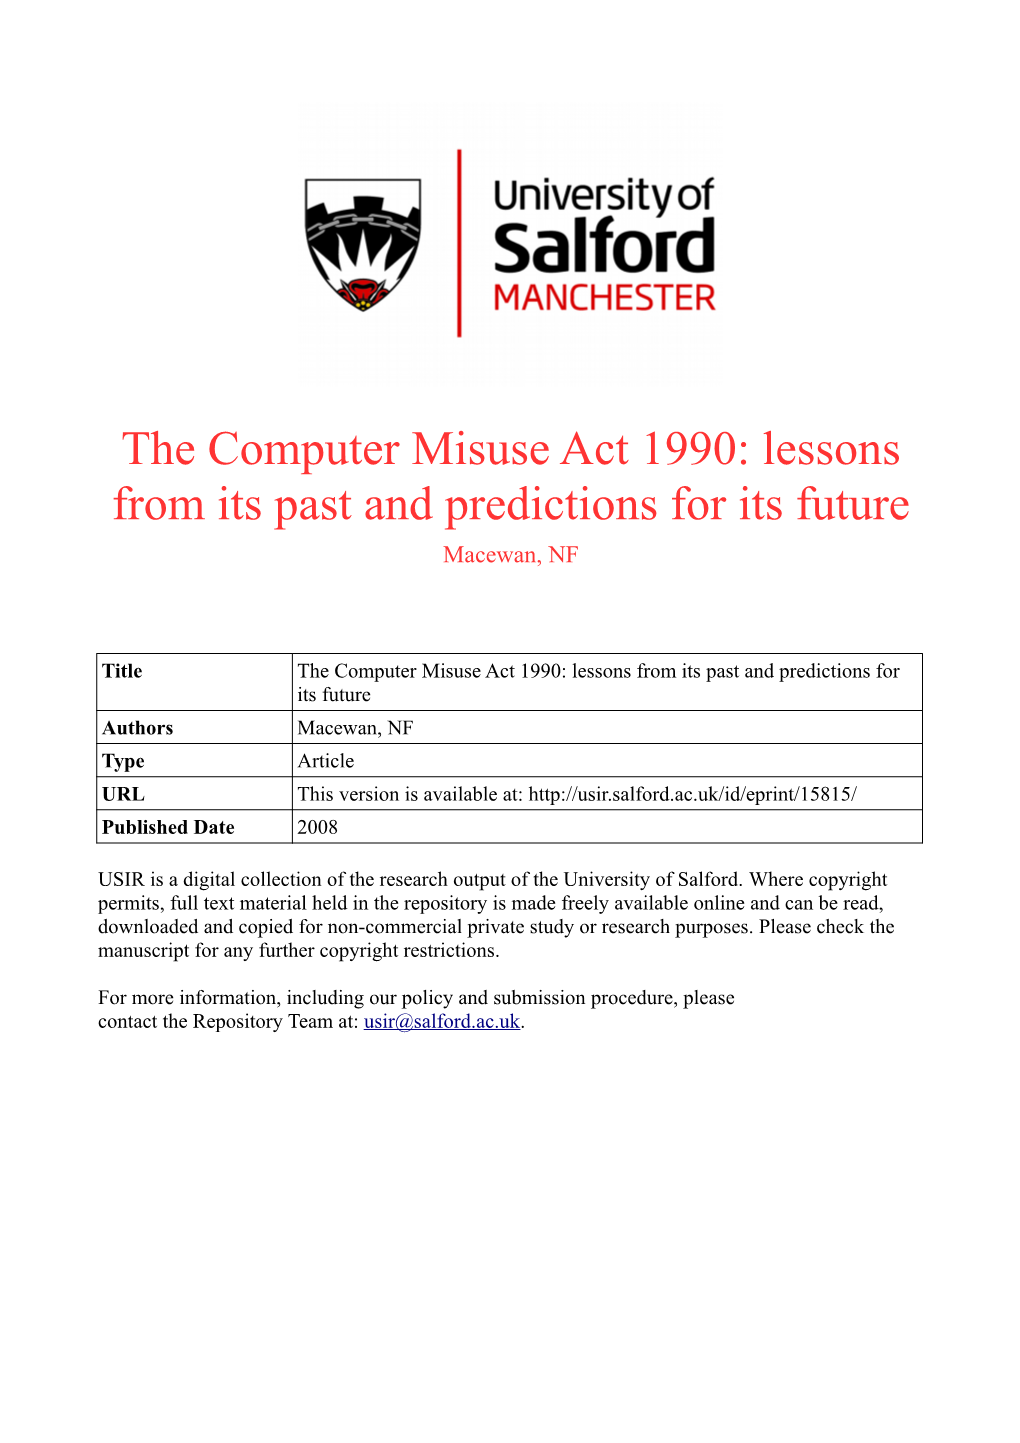 The Computer Misuse Act 1990: Lessons from Its Past and Predictions for Its Future Macewan, NF